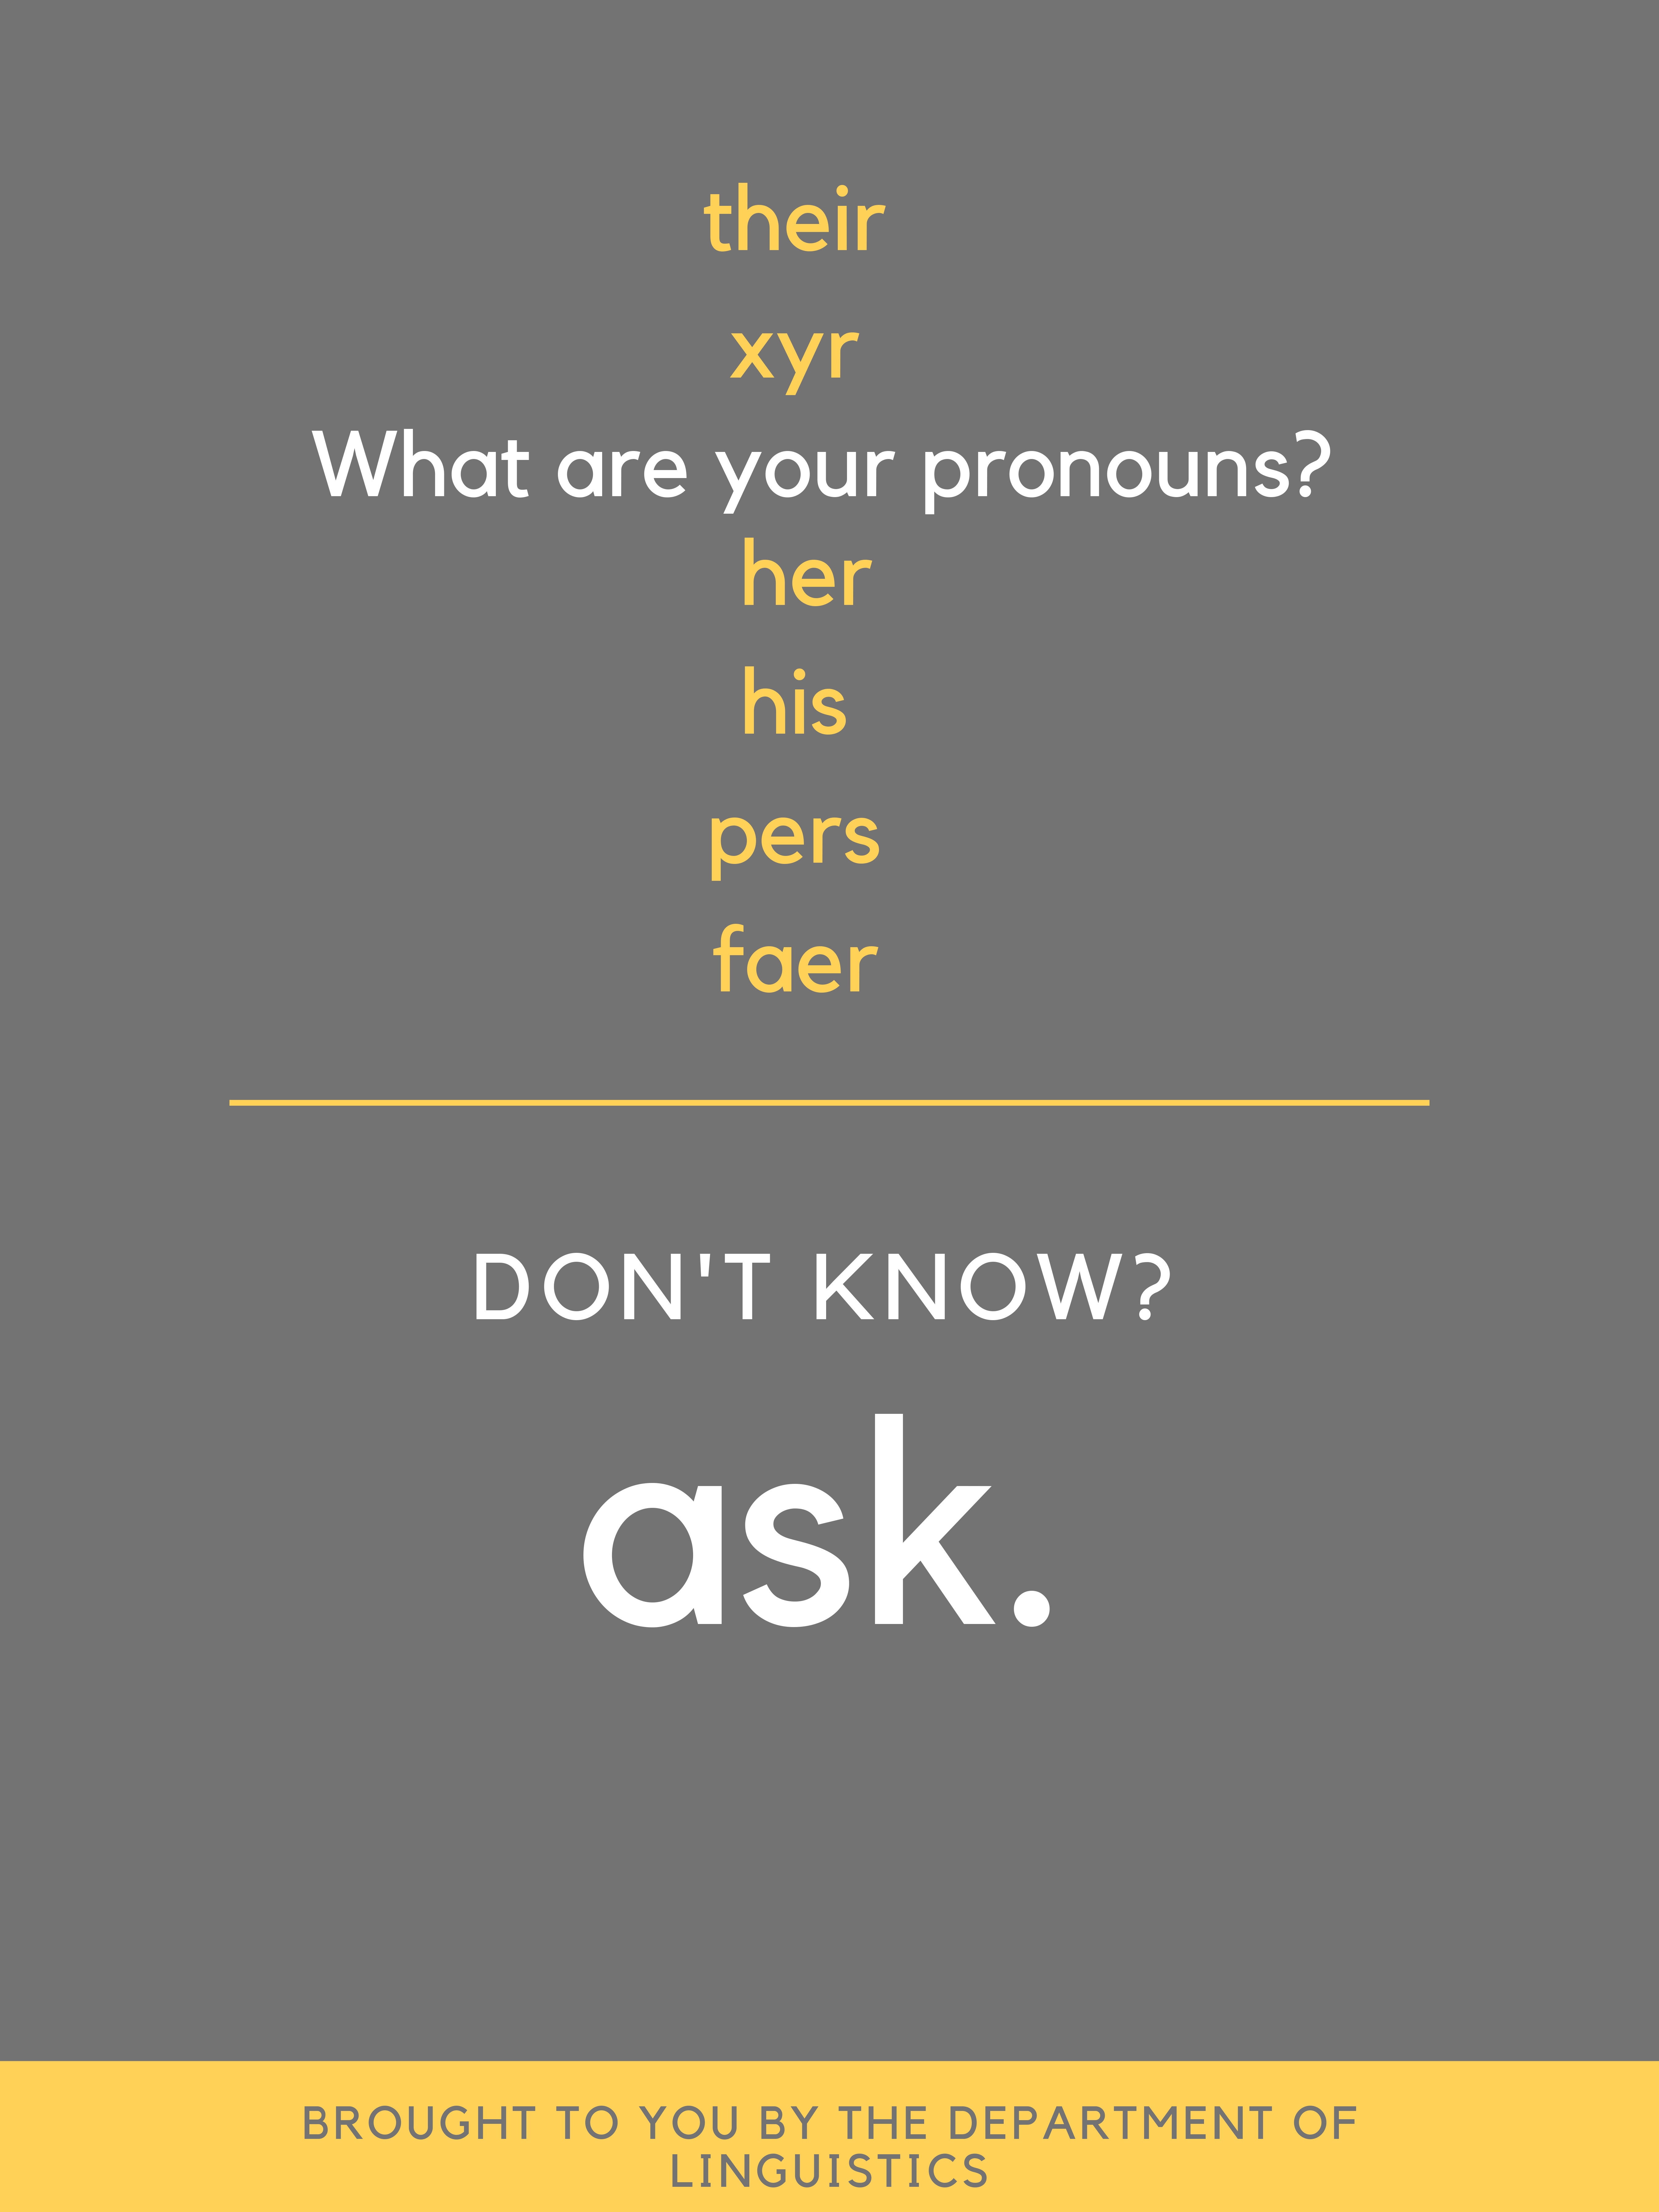 Linguistics Poster. What are your pronouns? Don't know? Ask. See webpage for  full description.